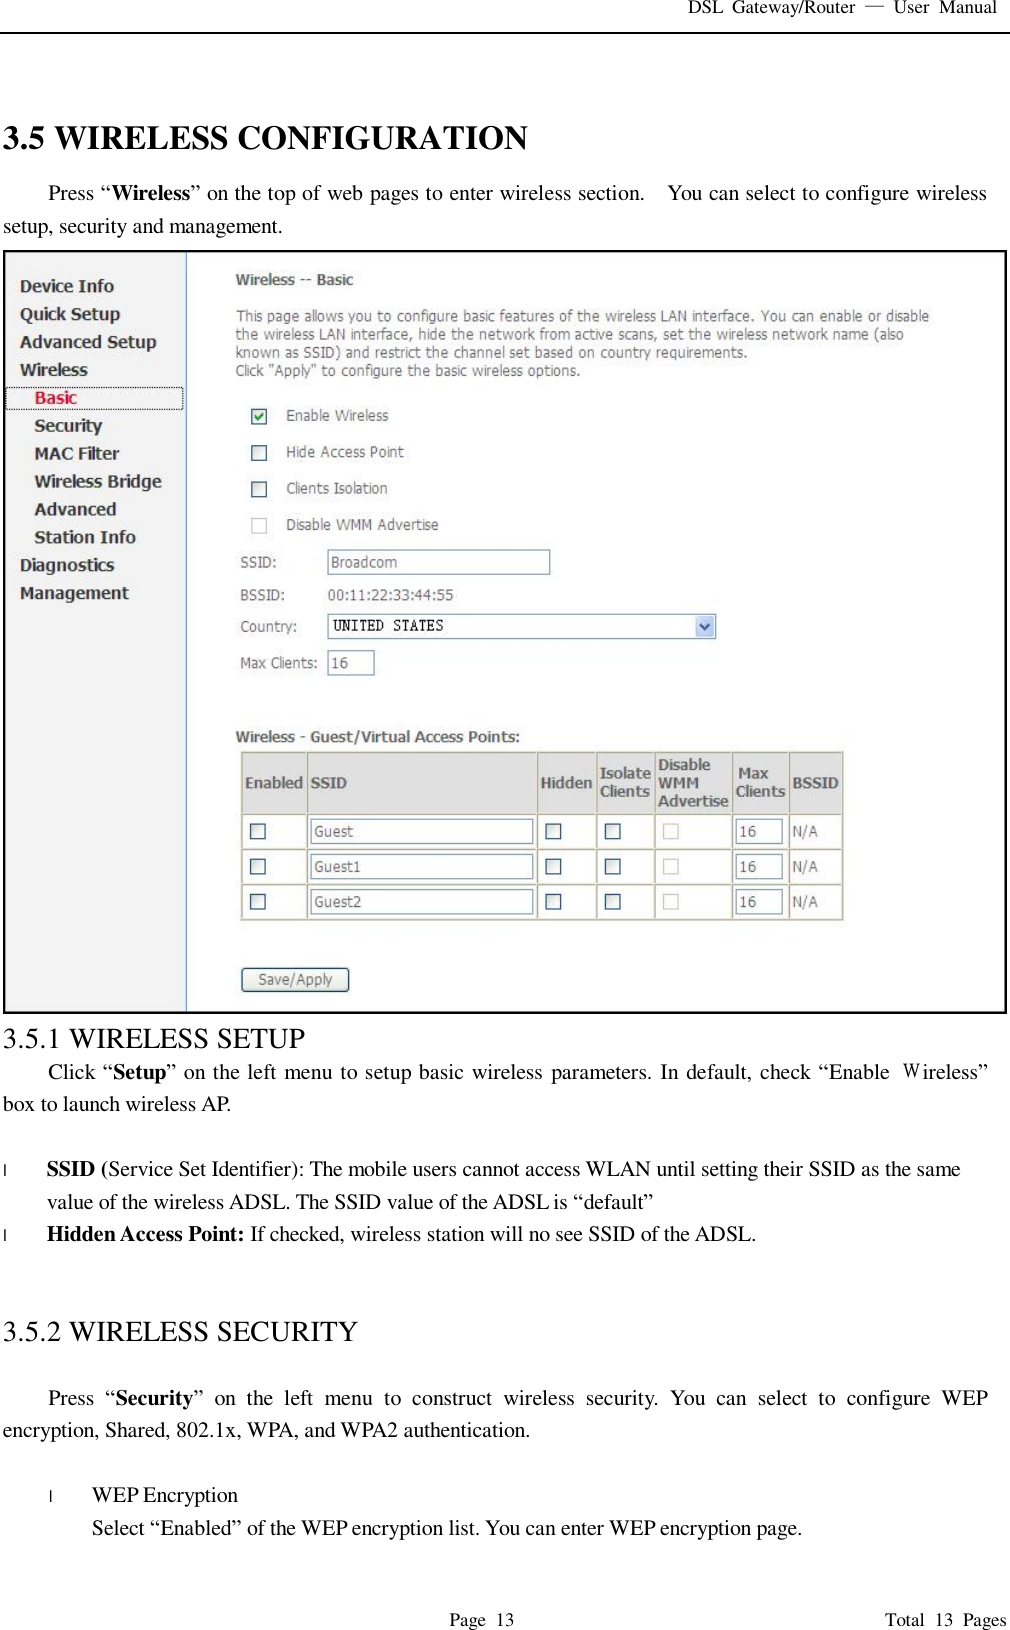 DSL Gateway/Router  — User Manual  Page 13                                       Total 13 Pages   3.5 WIRELESS CONFIGURATION Press “Wireless” on the top of web pages to enter wireless section.  You can select to configure wireless setup, security and management.  3.5.1 WIRELESS SETUP Click “Setup” on the left menu to setup basic wireless parameters. In default, check “Enable  Ｗireless” box to launch wireless AP.  l  SSID (Service Set Identifier): The mobile users cannot access WLAN until setting their SSID as the same value of the wireless ADSL. The SSID value of the ADSL is “default” l  Hidden Access Point: If checked, wireless station will no see SSID of the ADSL.   3.5.2 WIRELESS SECURITY  Press  “Security” on the left menu to construct wireless security. You can select to configure WEP encryption, Shared, 802.1x, WPA, and WPA2 authentication.  l  WEP Encryption Select “Enabled” of the WEP encryption list. You can enter WEP encryption page. 